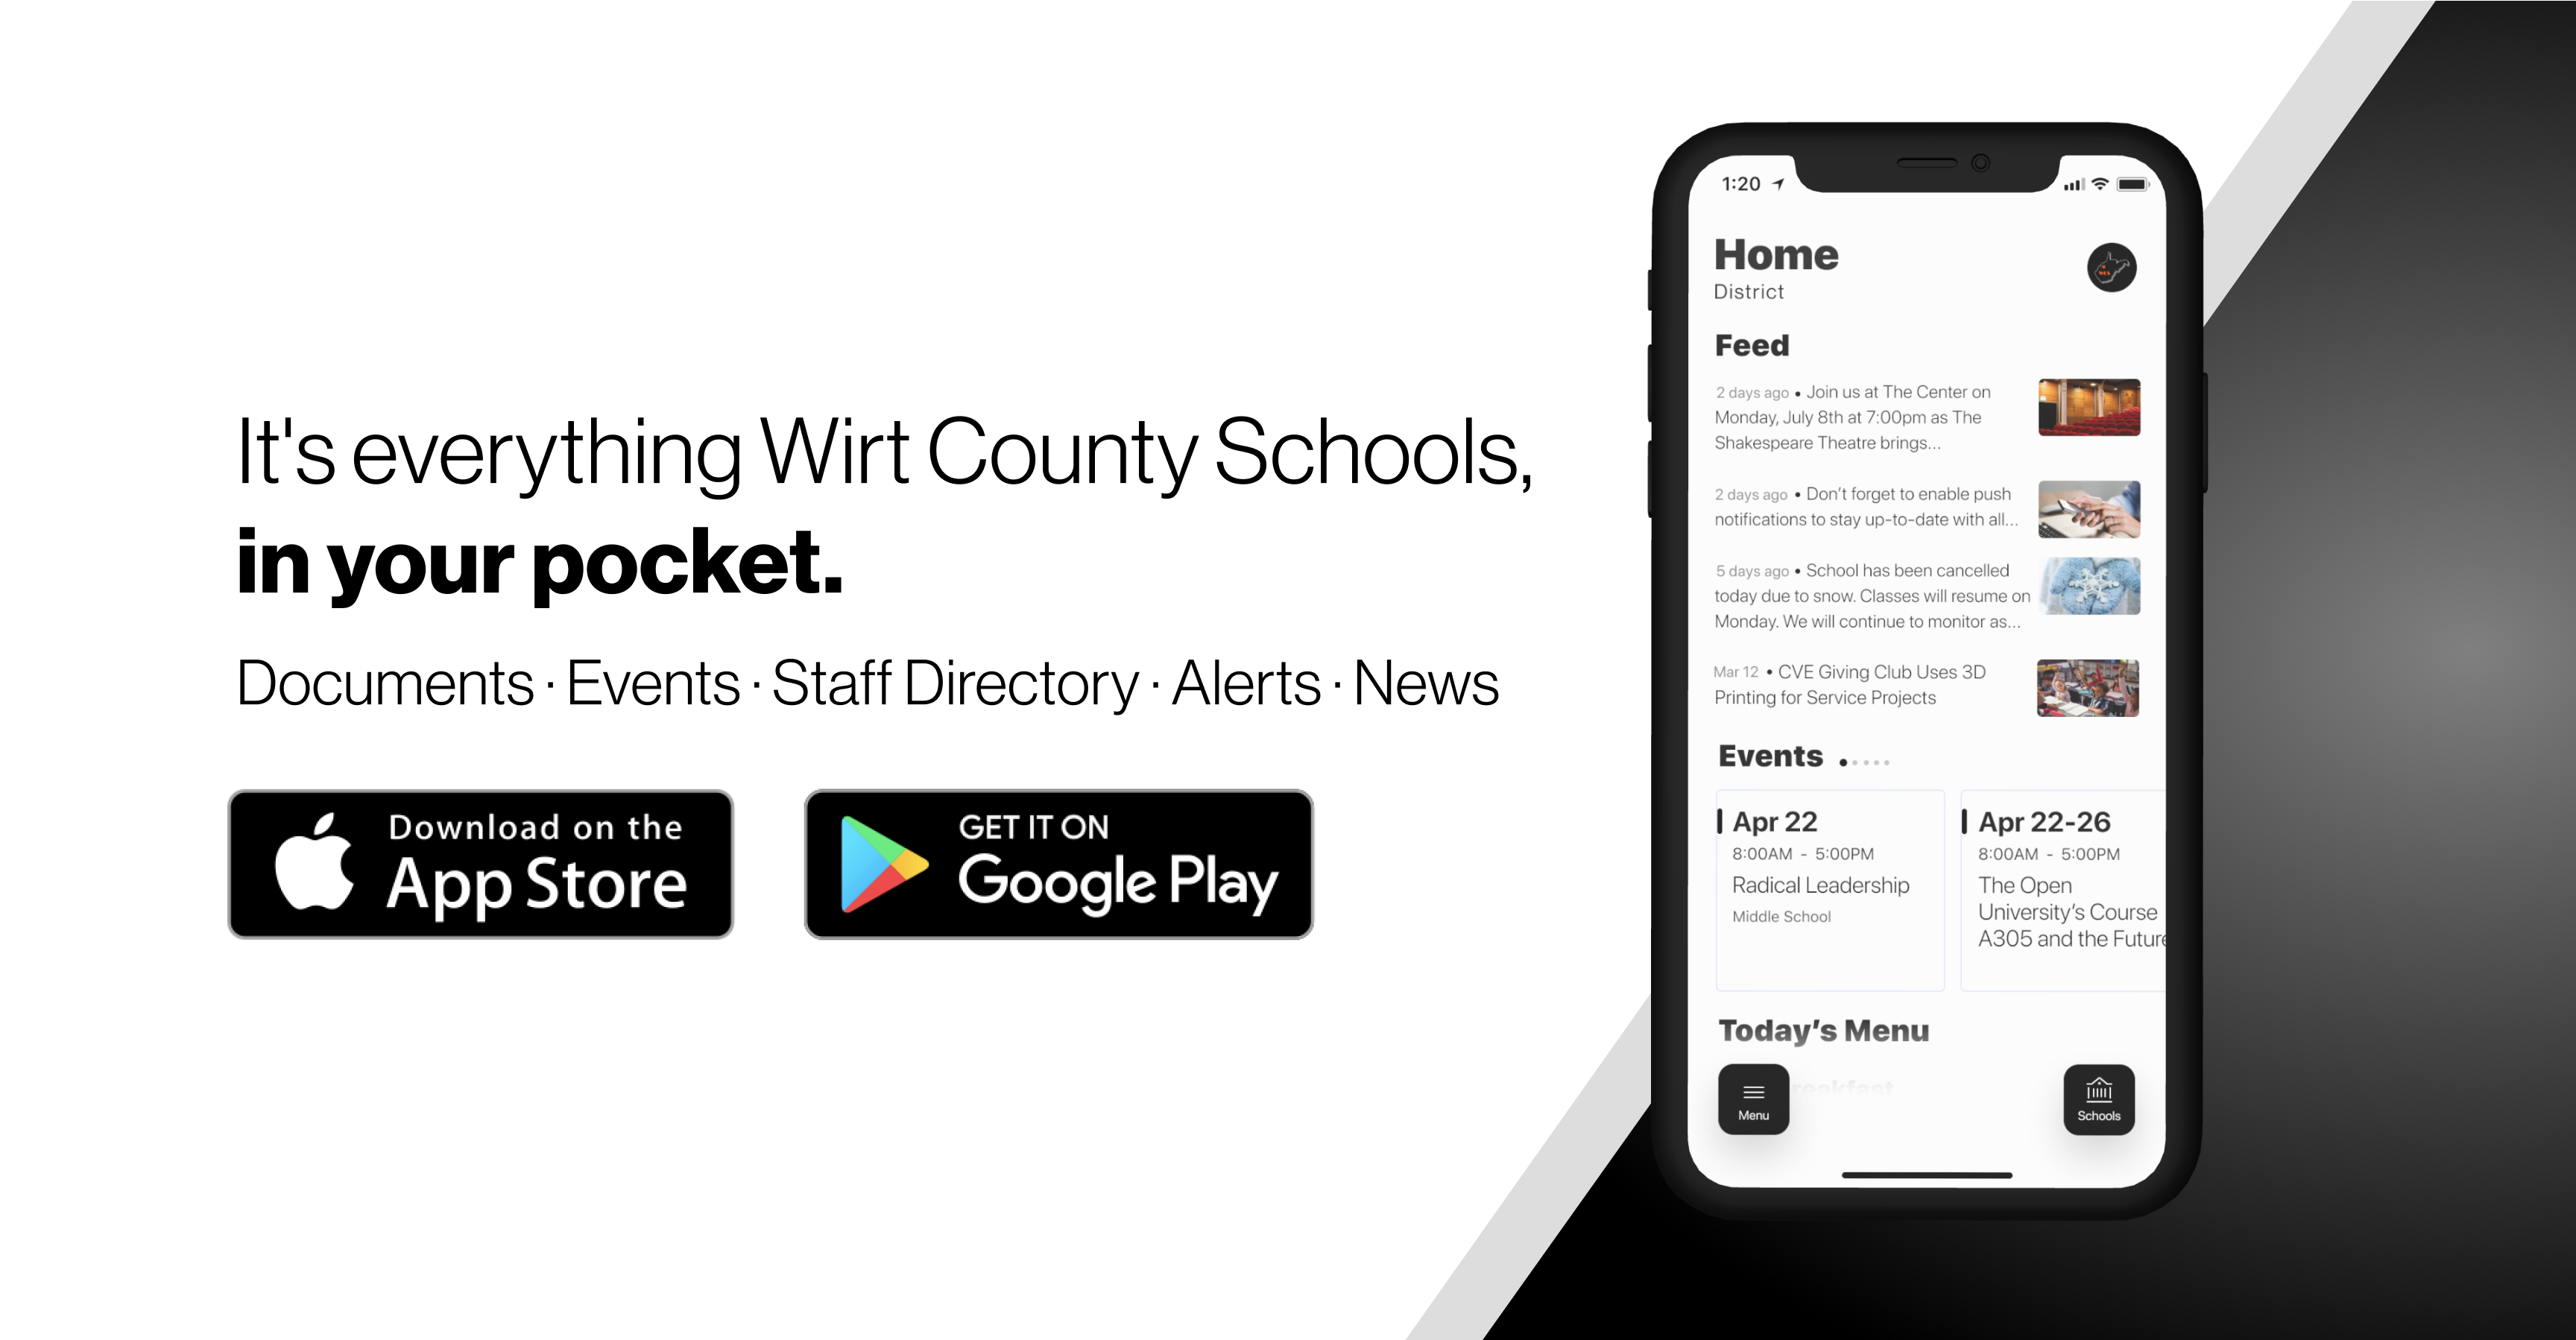 it's everything wirt county, in your pocket.